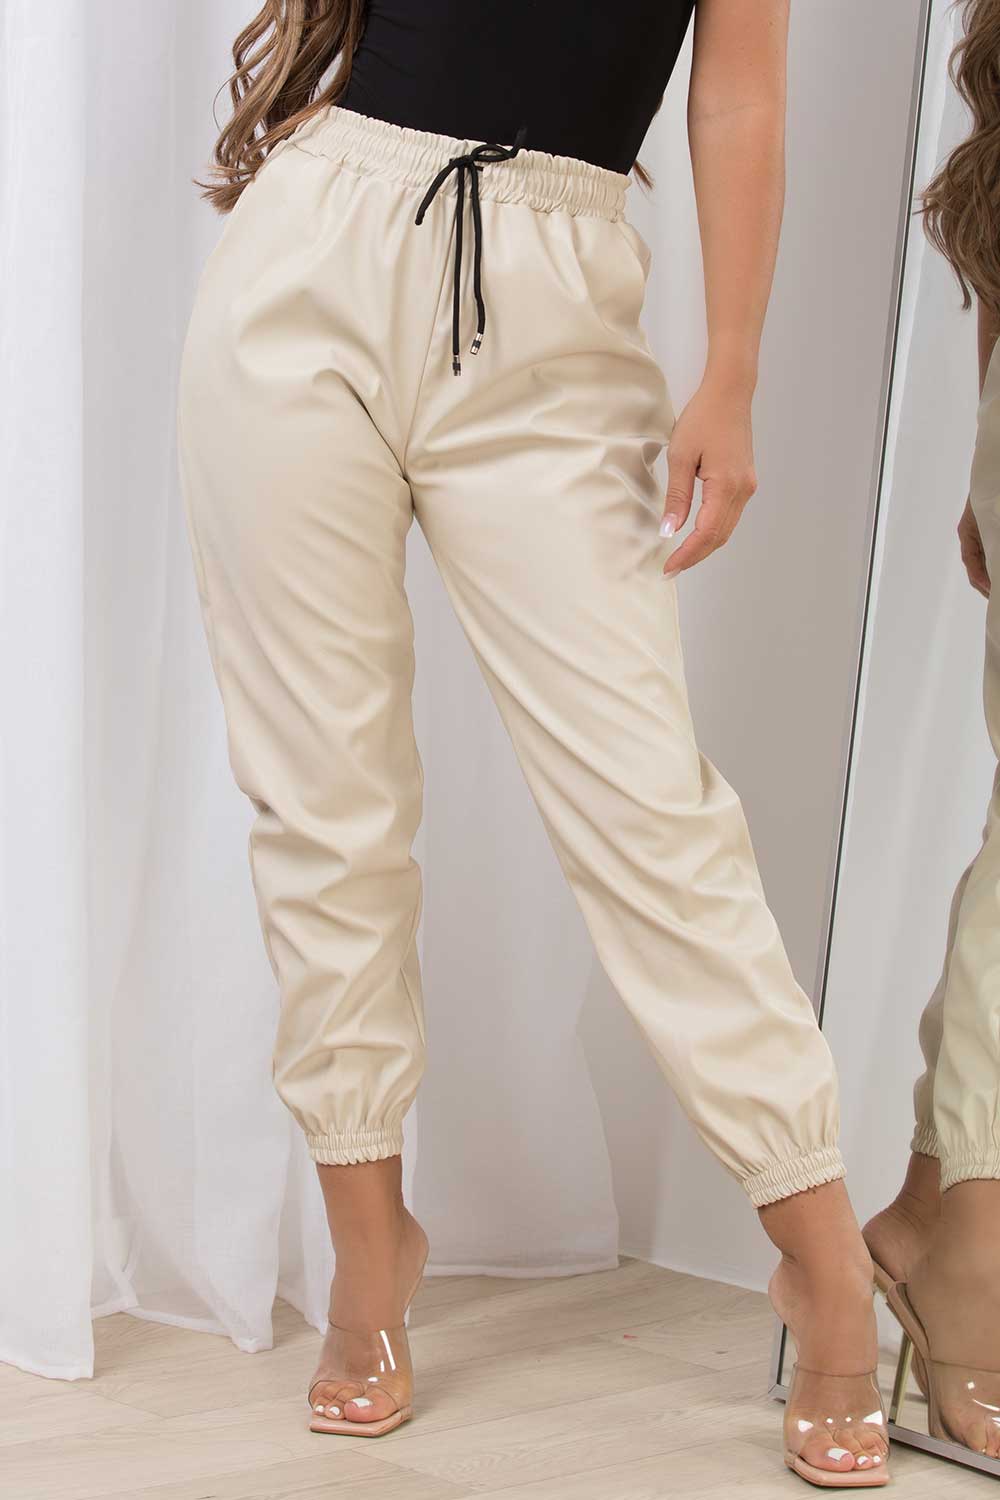 leather look joggers womens